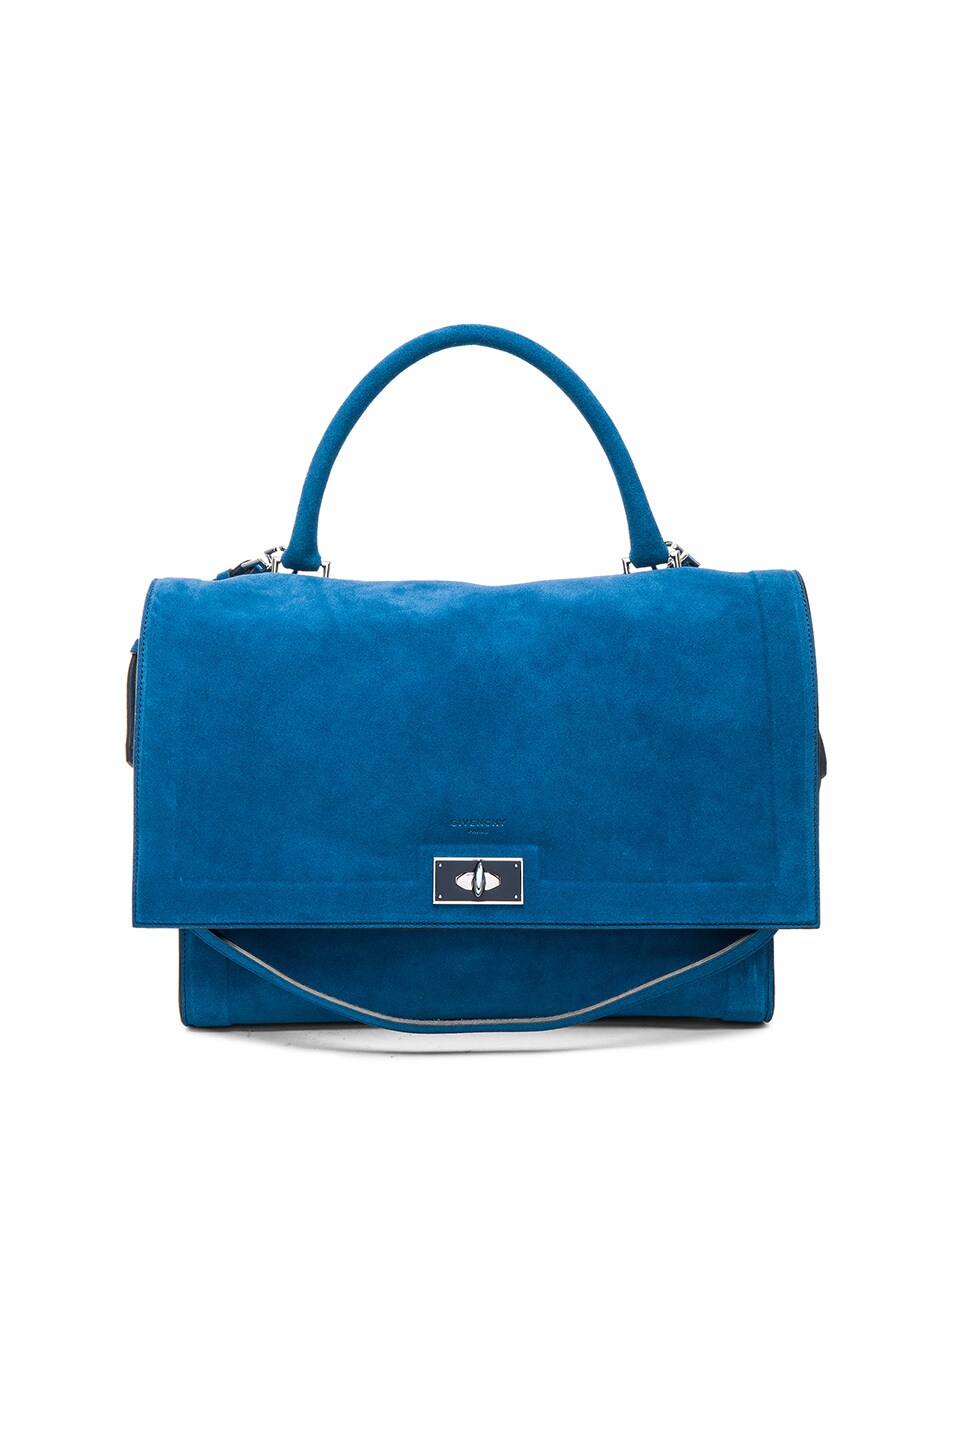 Image 1 of Givenchy Medium Suede Shark Bag in Electric Blue